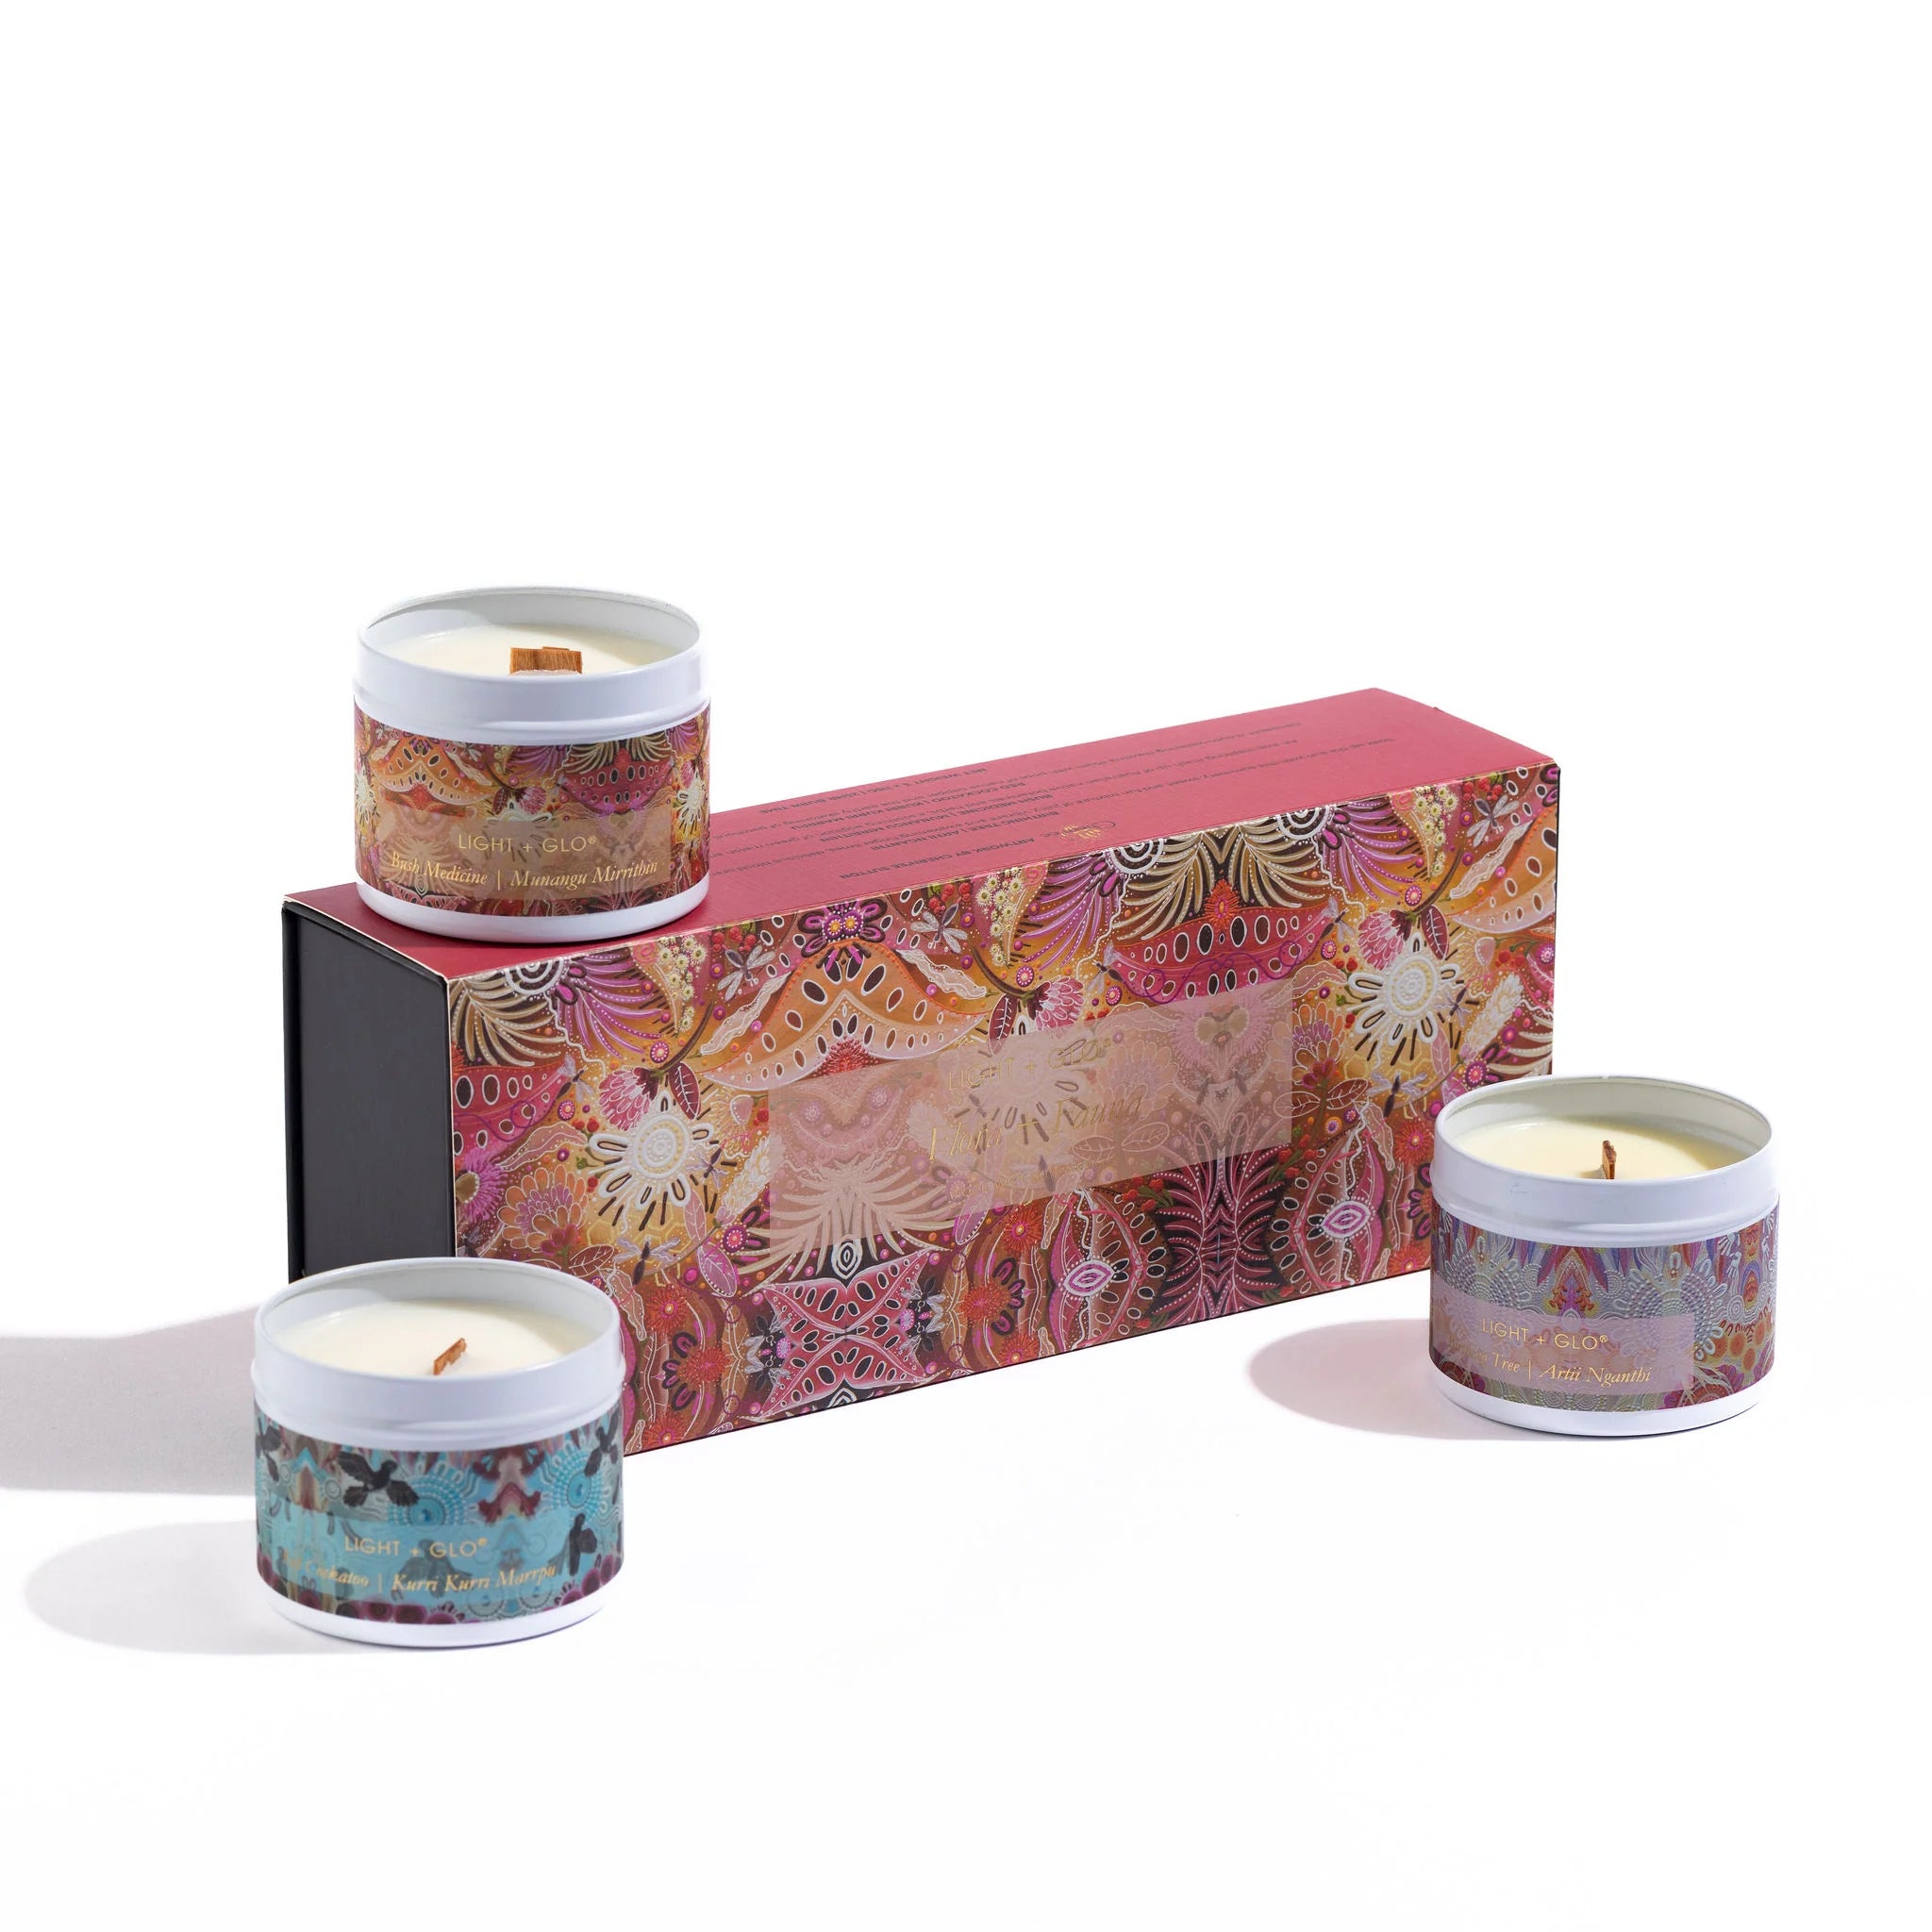 Candle gift box with 3 candles in white tins around the edge